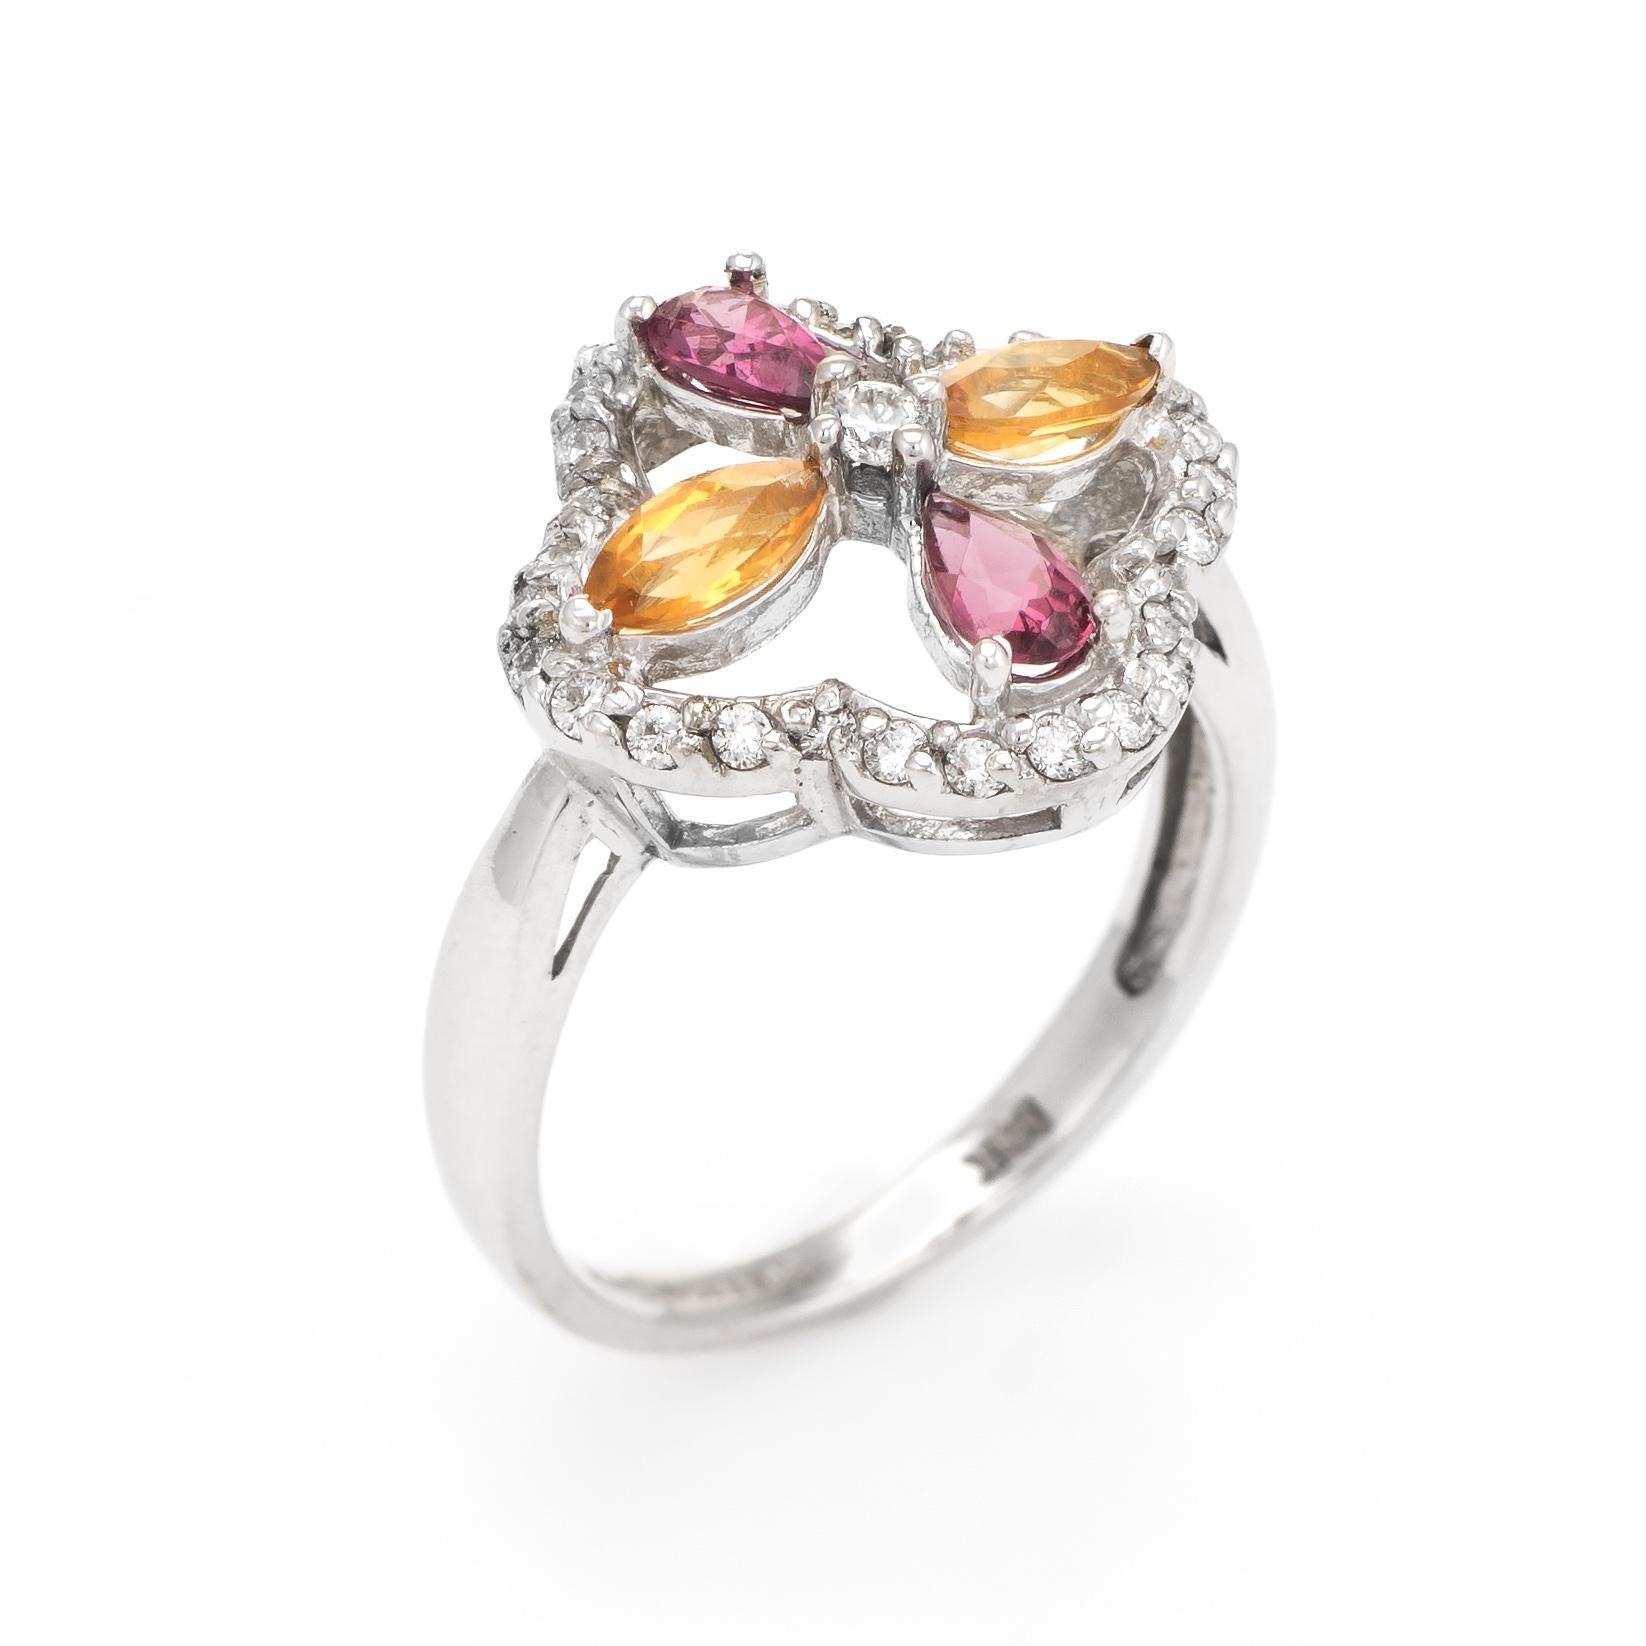 Finely detailed estate Kate Mc Cullar cocktail ring, crafted in 14 karat white gold. 

Pear cut rhodolite garnets are estimated at 0.18 carats each (0.36 carats total estimated weight) and marquise cut citrines are estimated at 0.18 carats each